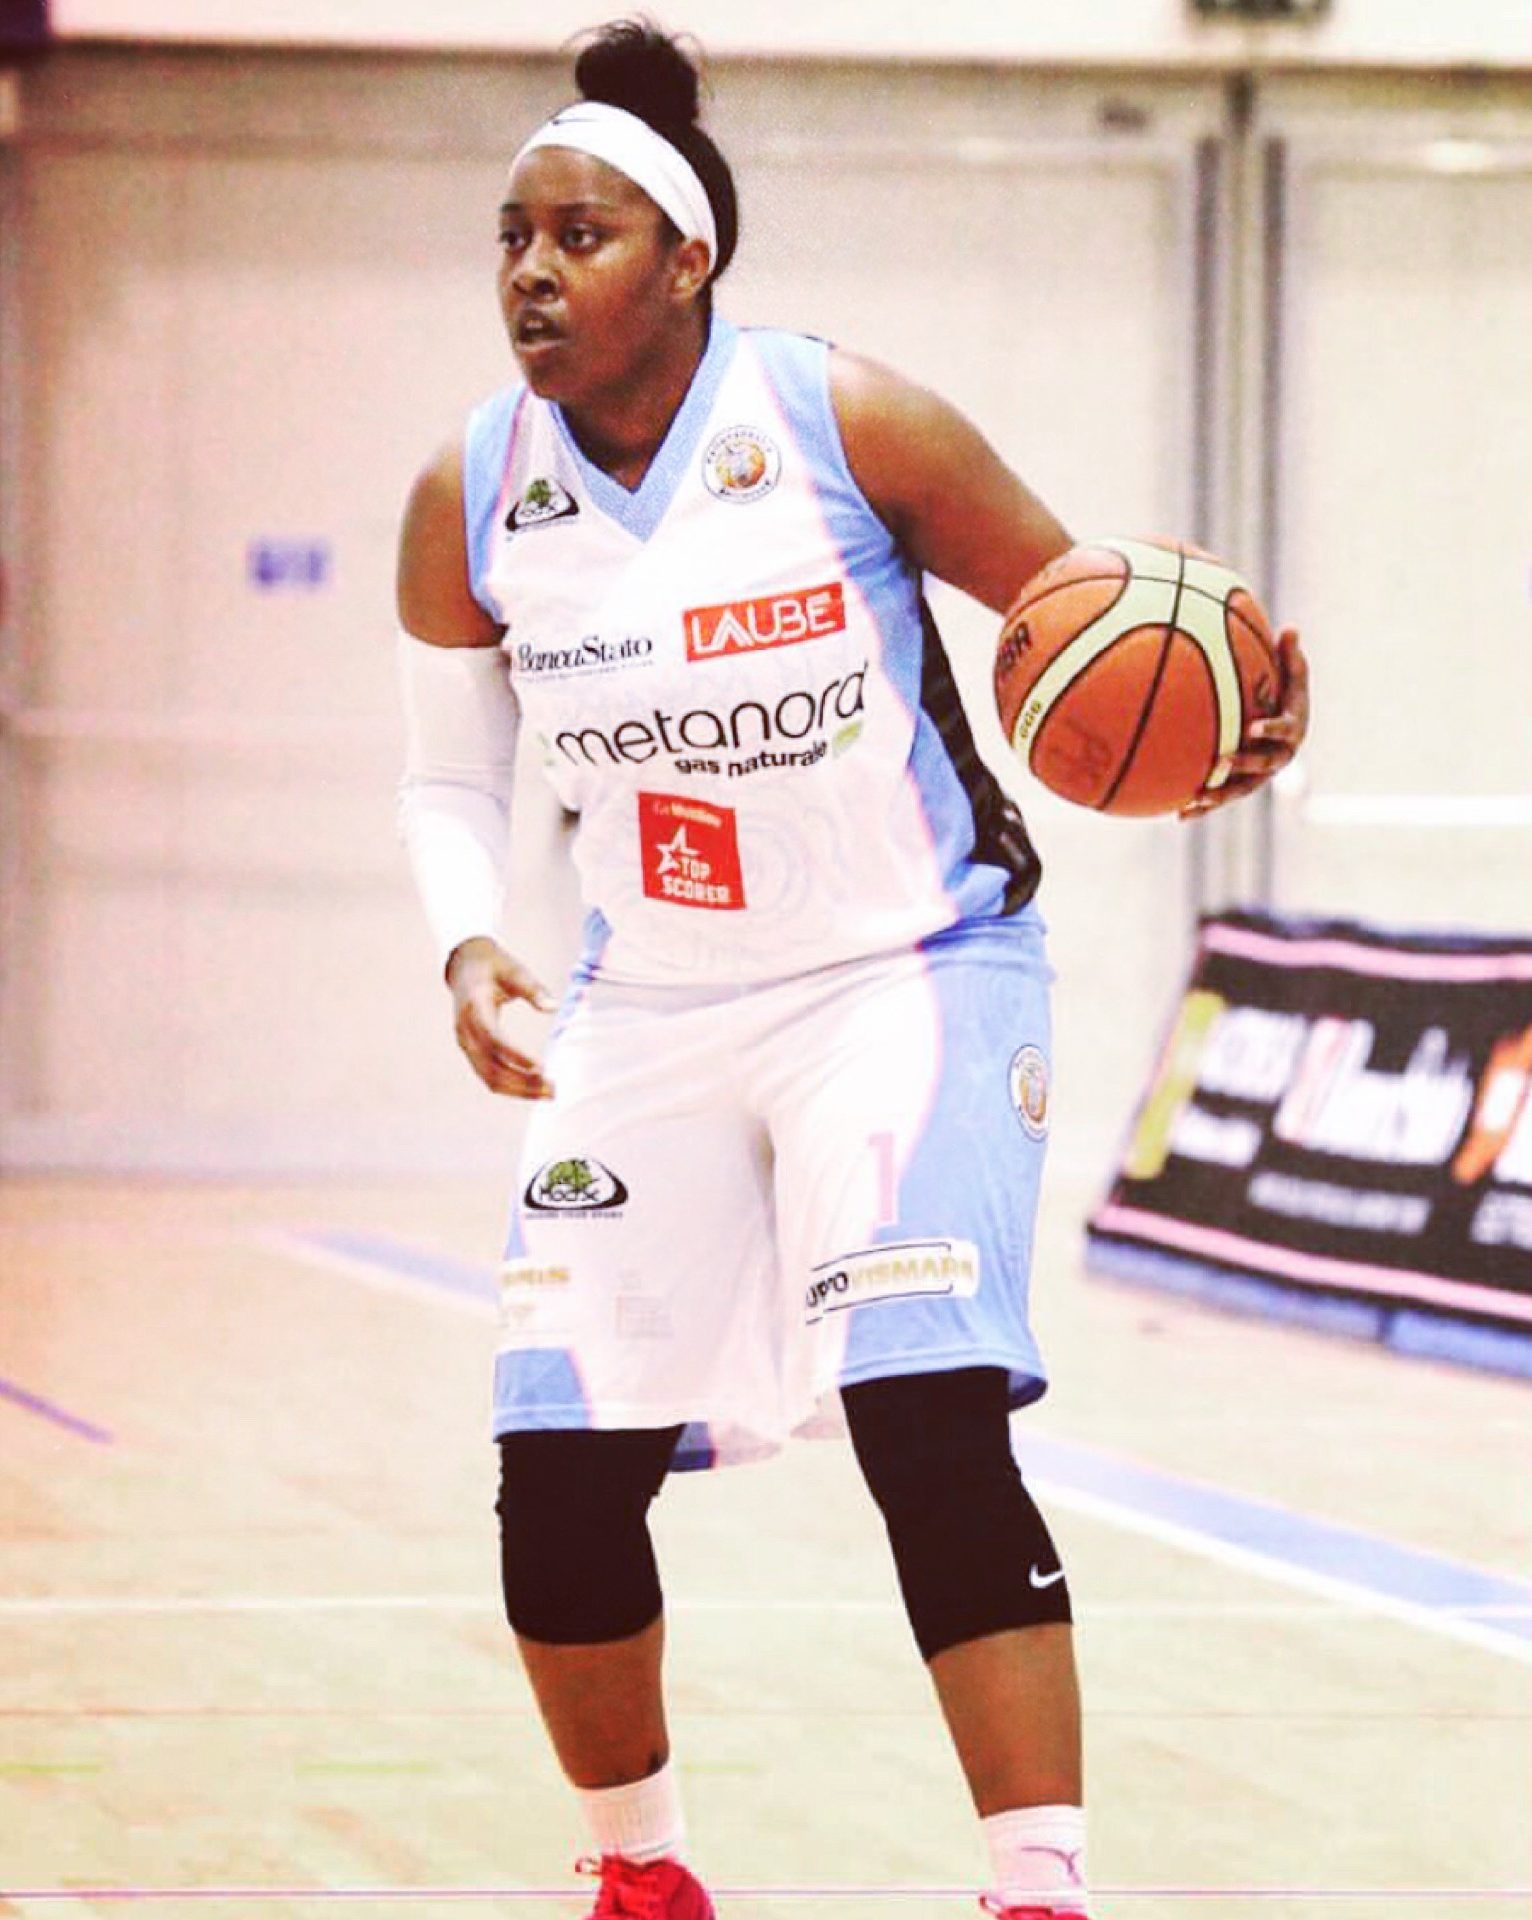 Miller surveys the court during a game with Bellinzona Basket in Switzerland. Miller was with Bellinzona basket for a season before deciding to step back and coach at Douglass.